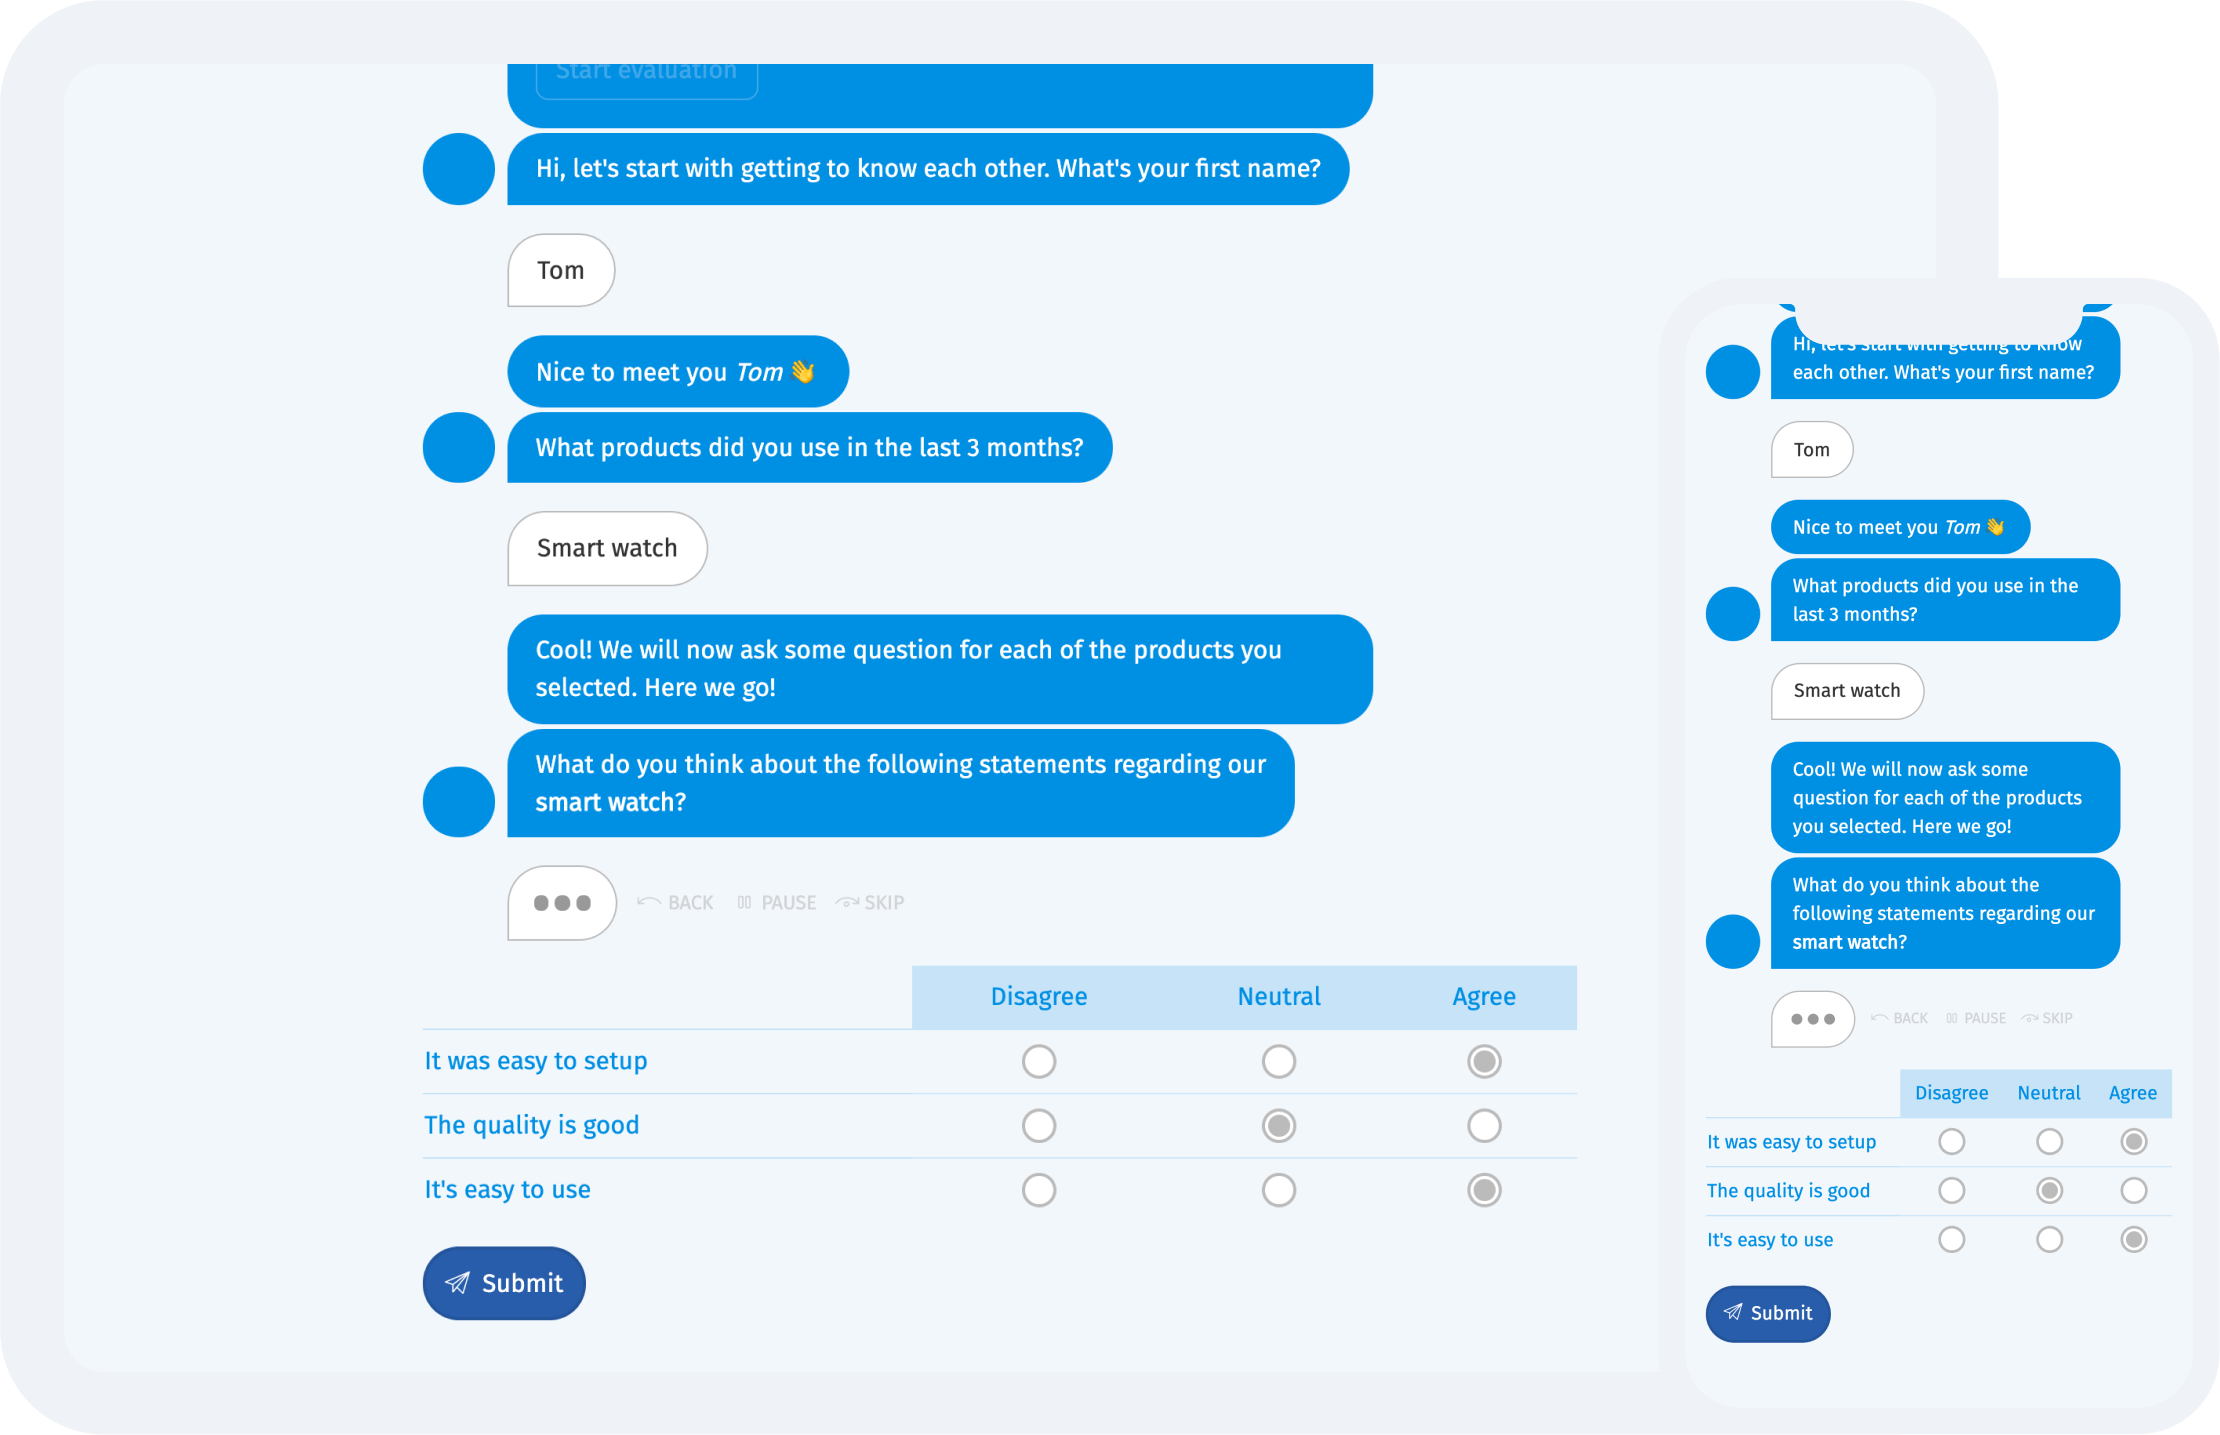 Screenshots of a product evaluation survey in the chat form face, shown on a tablet and a mobile phone.